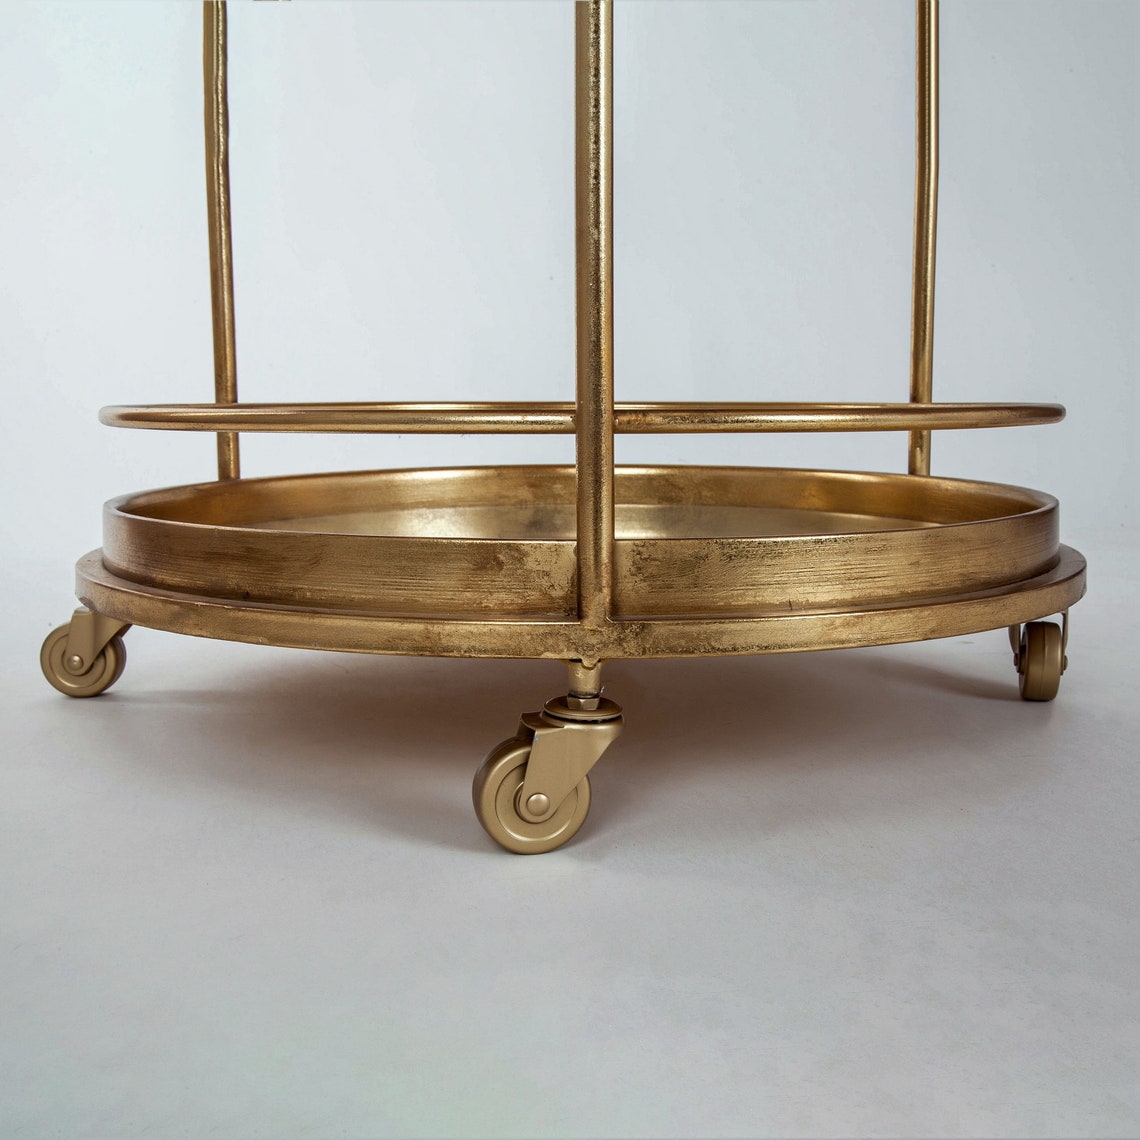 Glamourous Gold Gilt Leaf Drinks Trolley / Side table on wheels